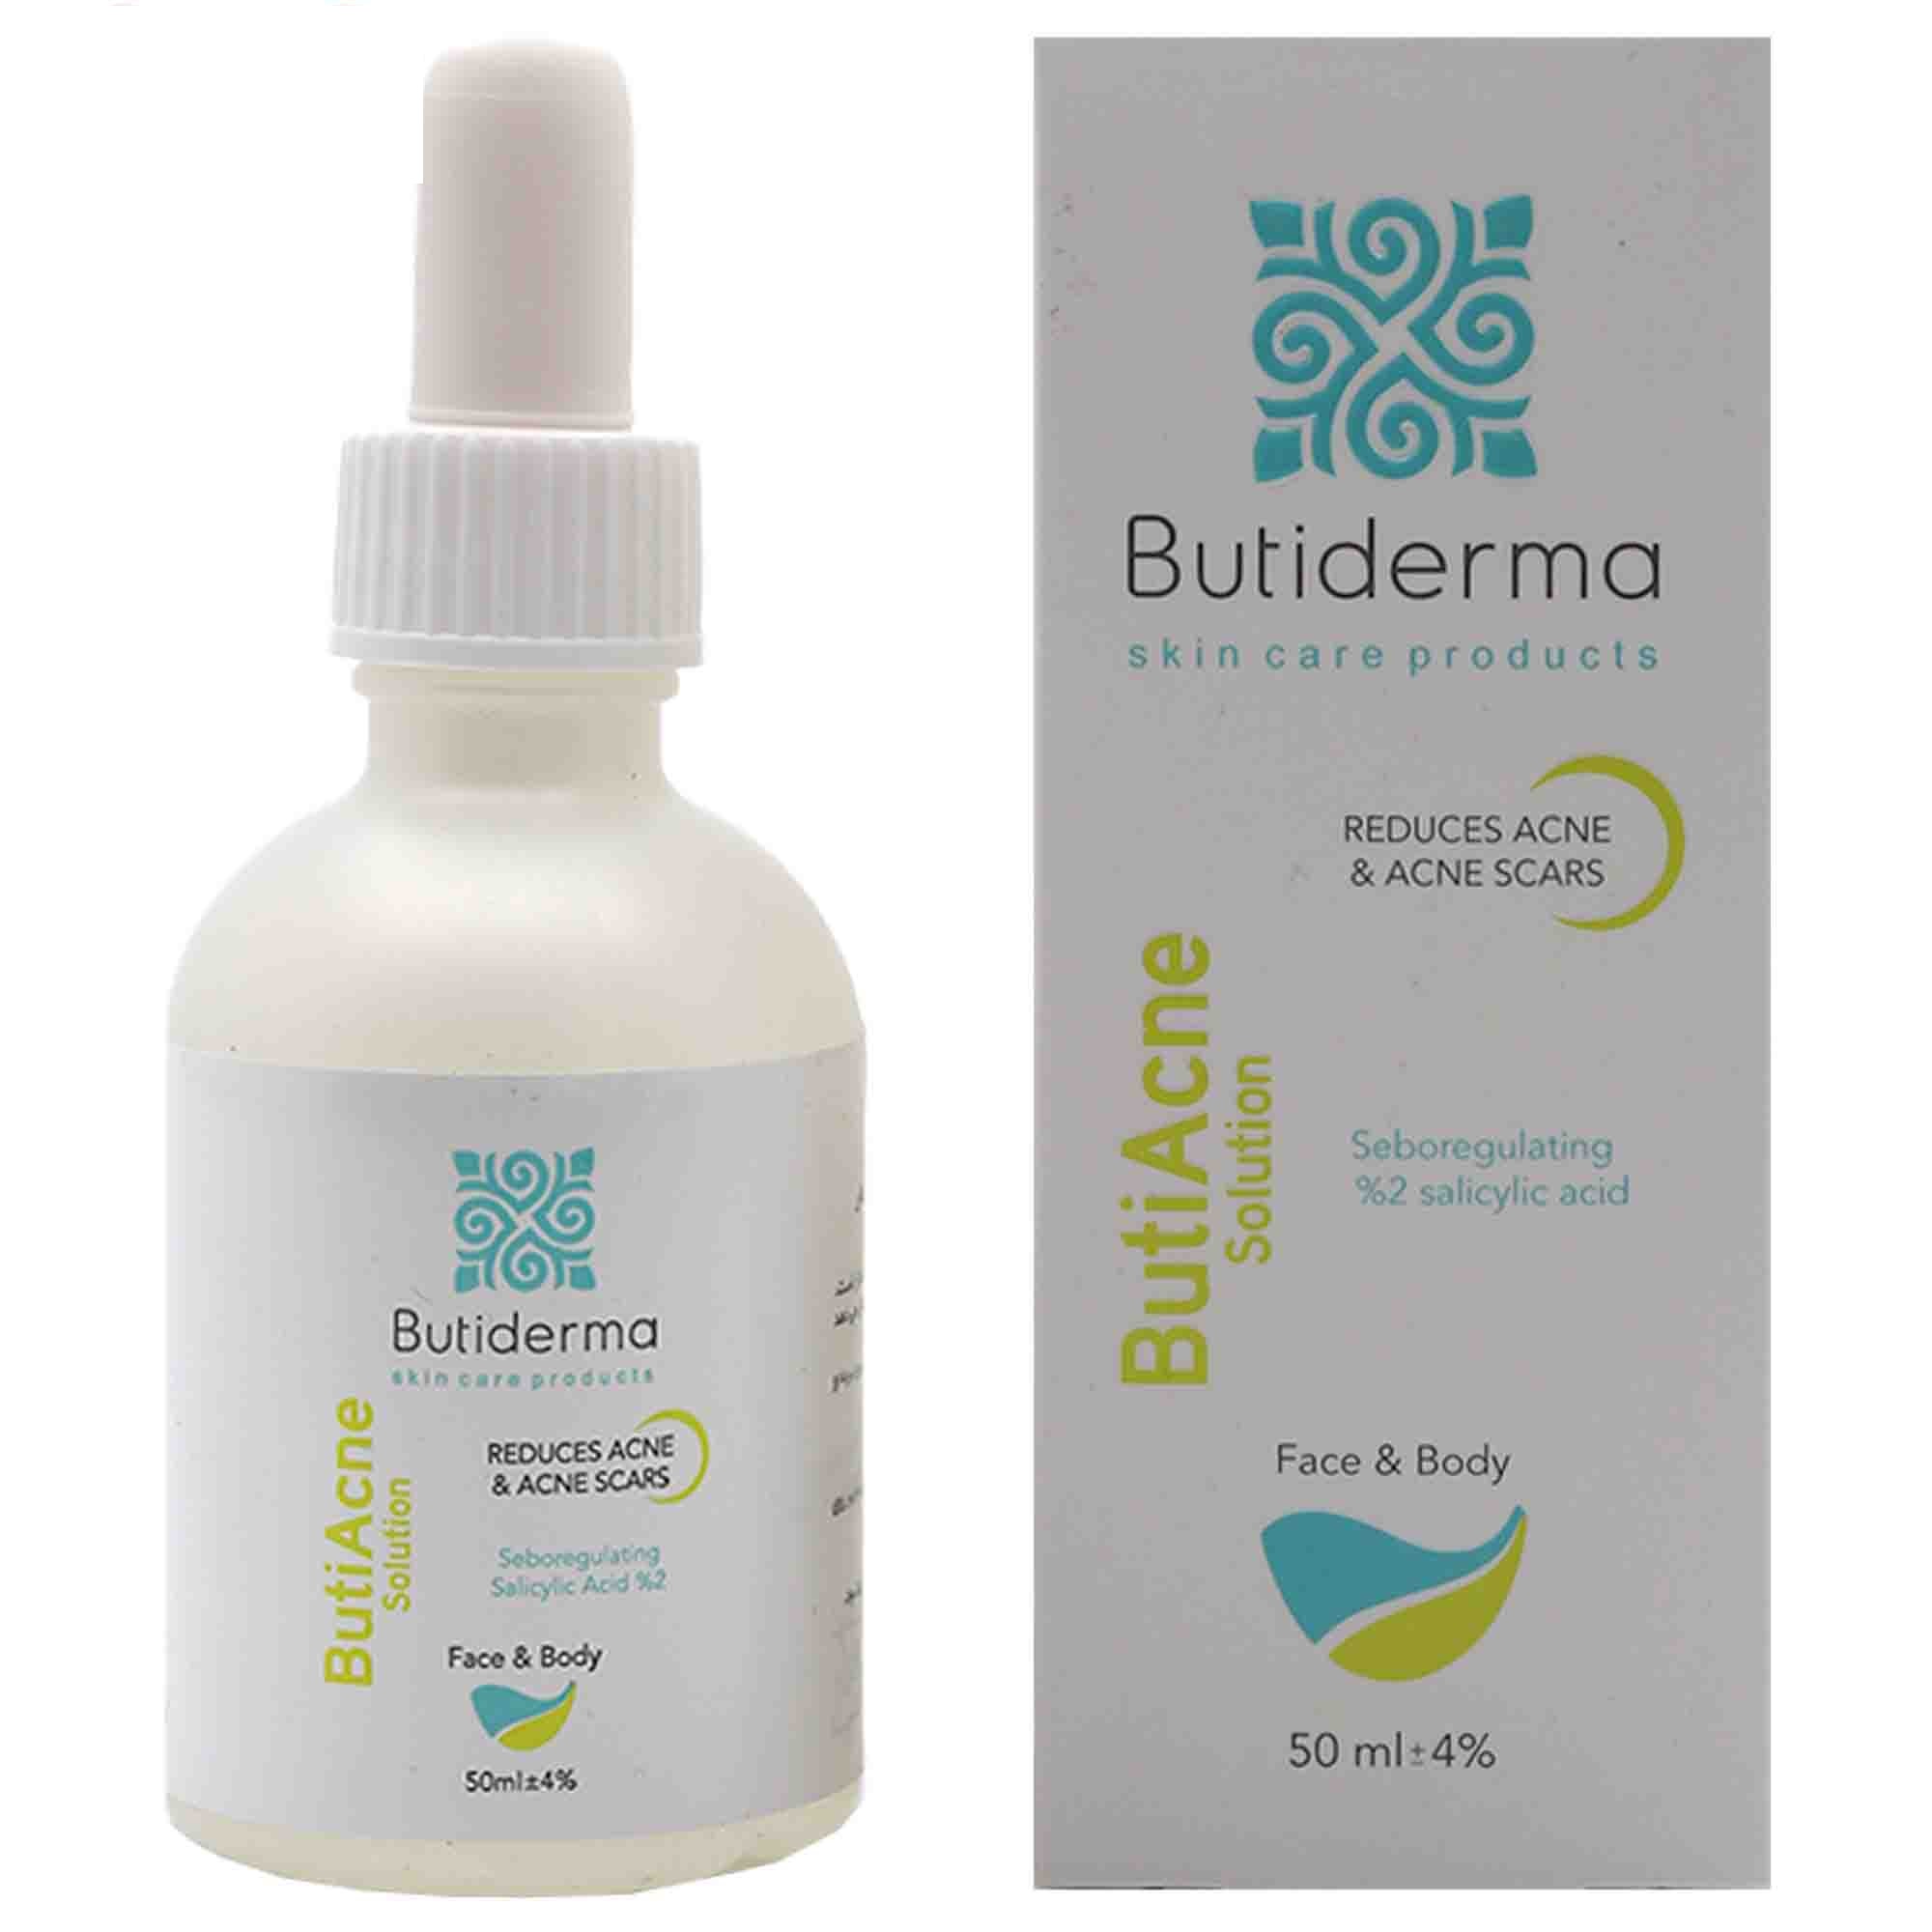 Oily and boiling skin exfoliating solution containing 2 % salicicic acid